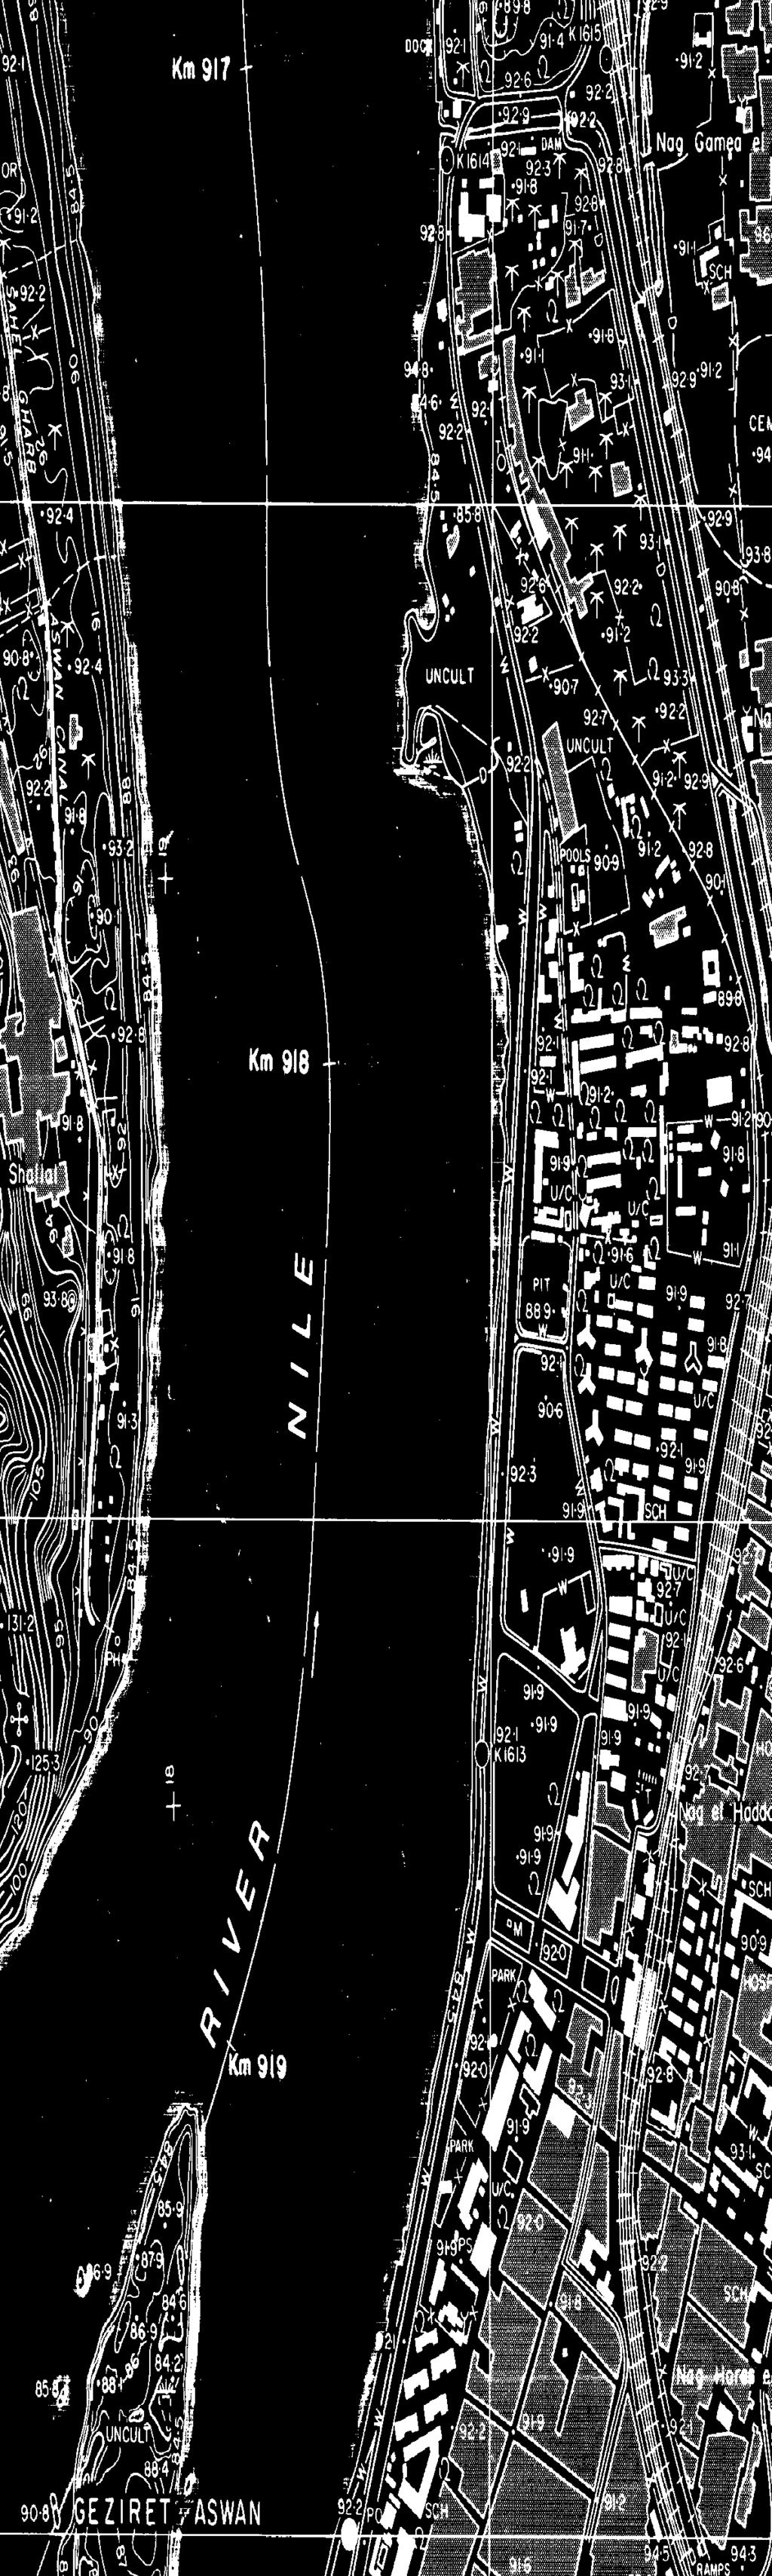 Fig 1 Aerial Map of the Berthing Area Fig 2 Layout of Berths Locations 2.